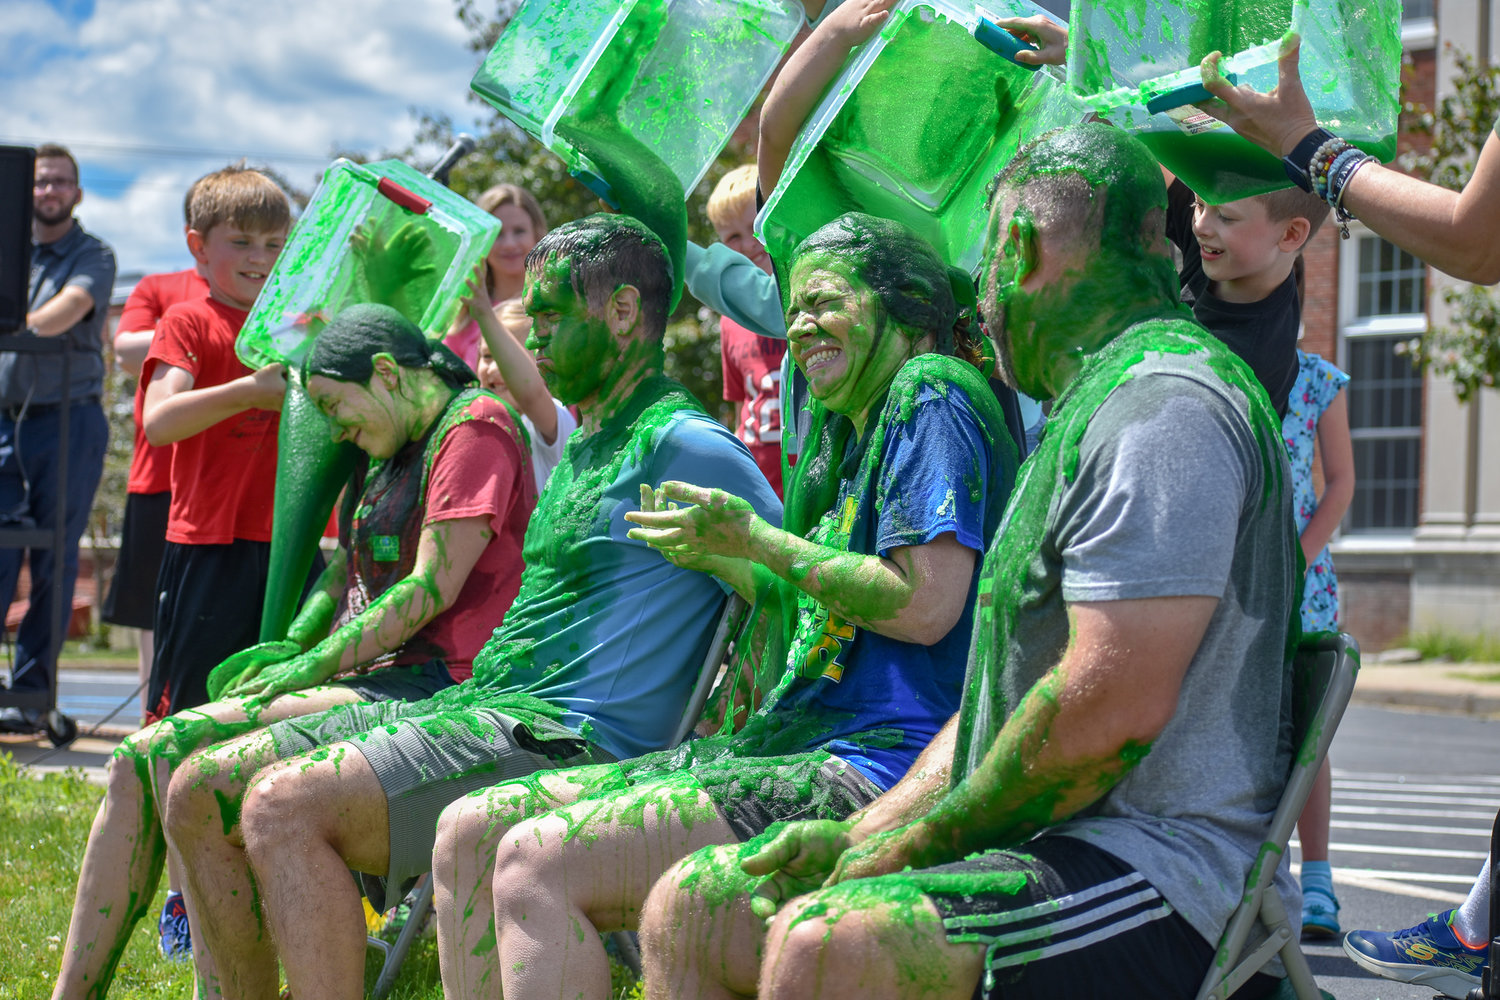 Madison Central School officials face the final pour of slippery green slime as part of a celebration for students in grades K-5 who together surpassed their fundraising goal for the American Heart Association.